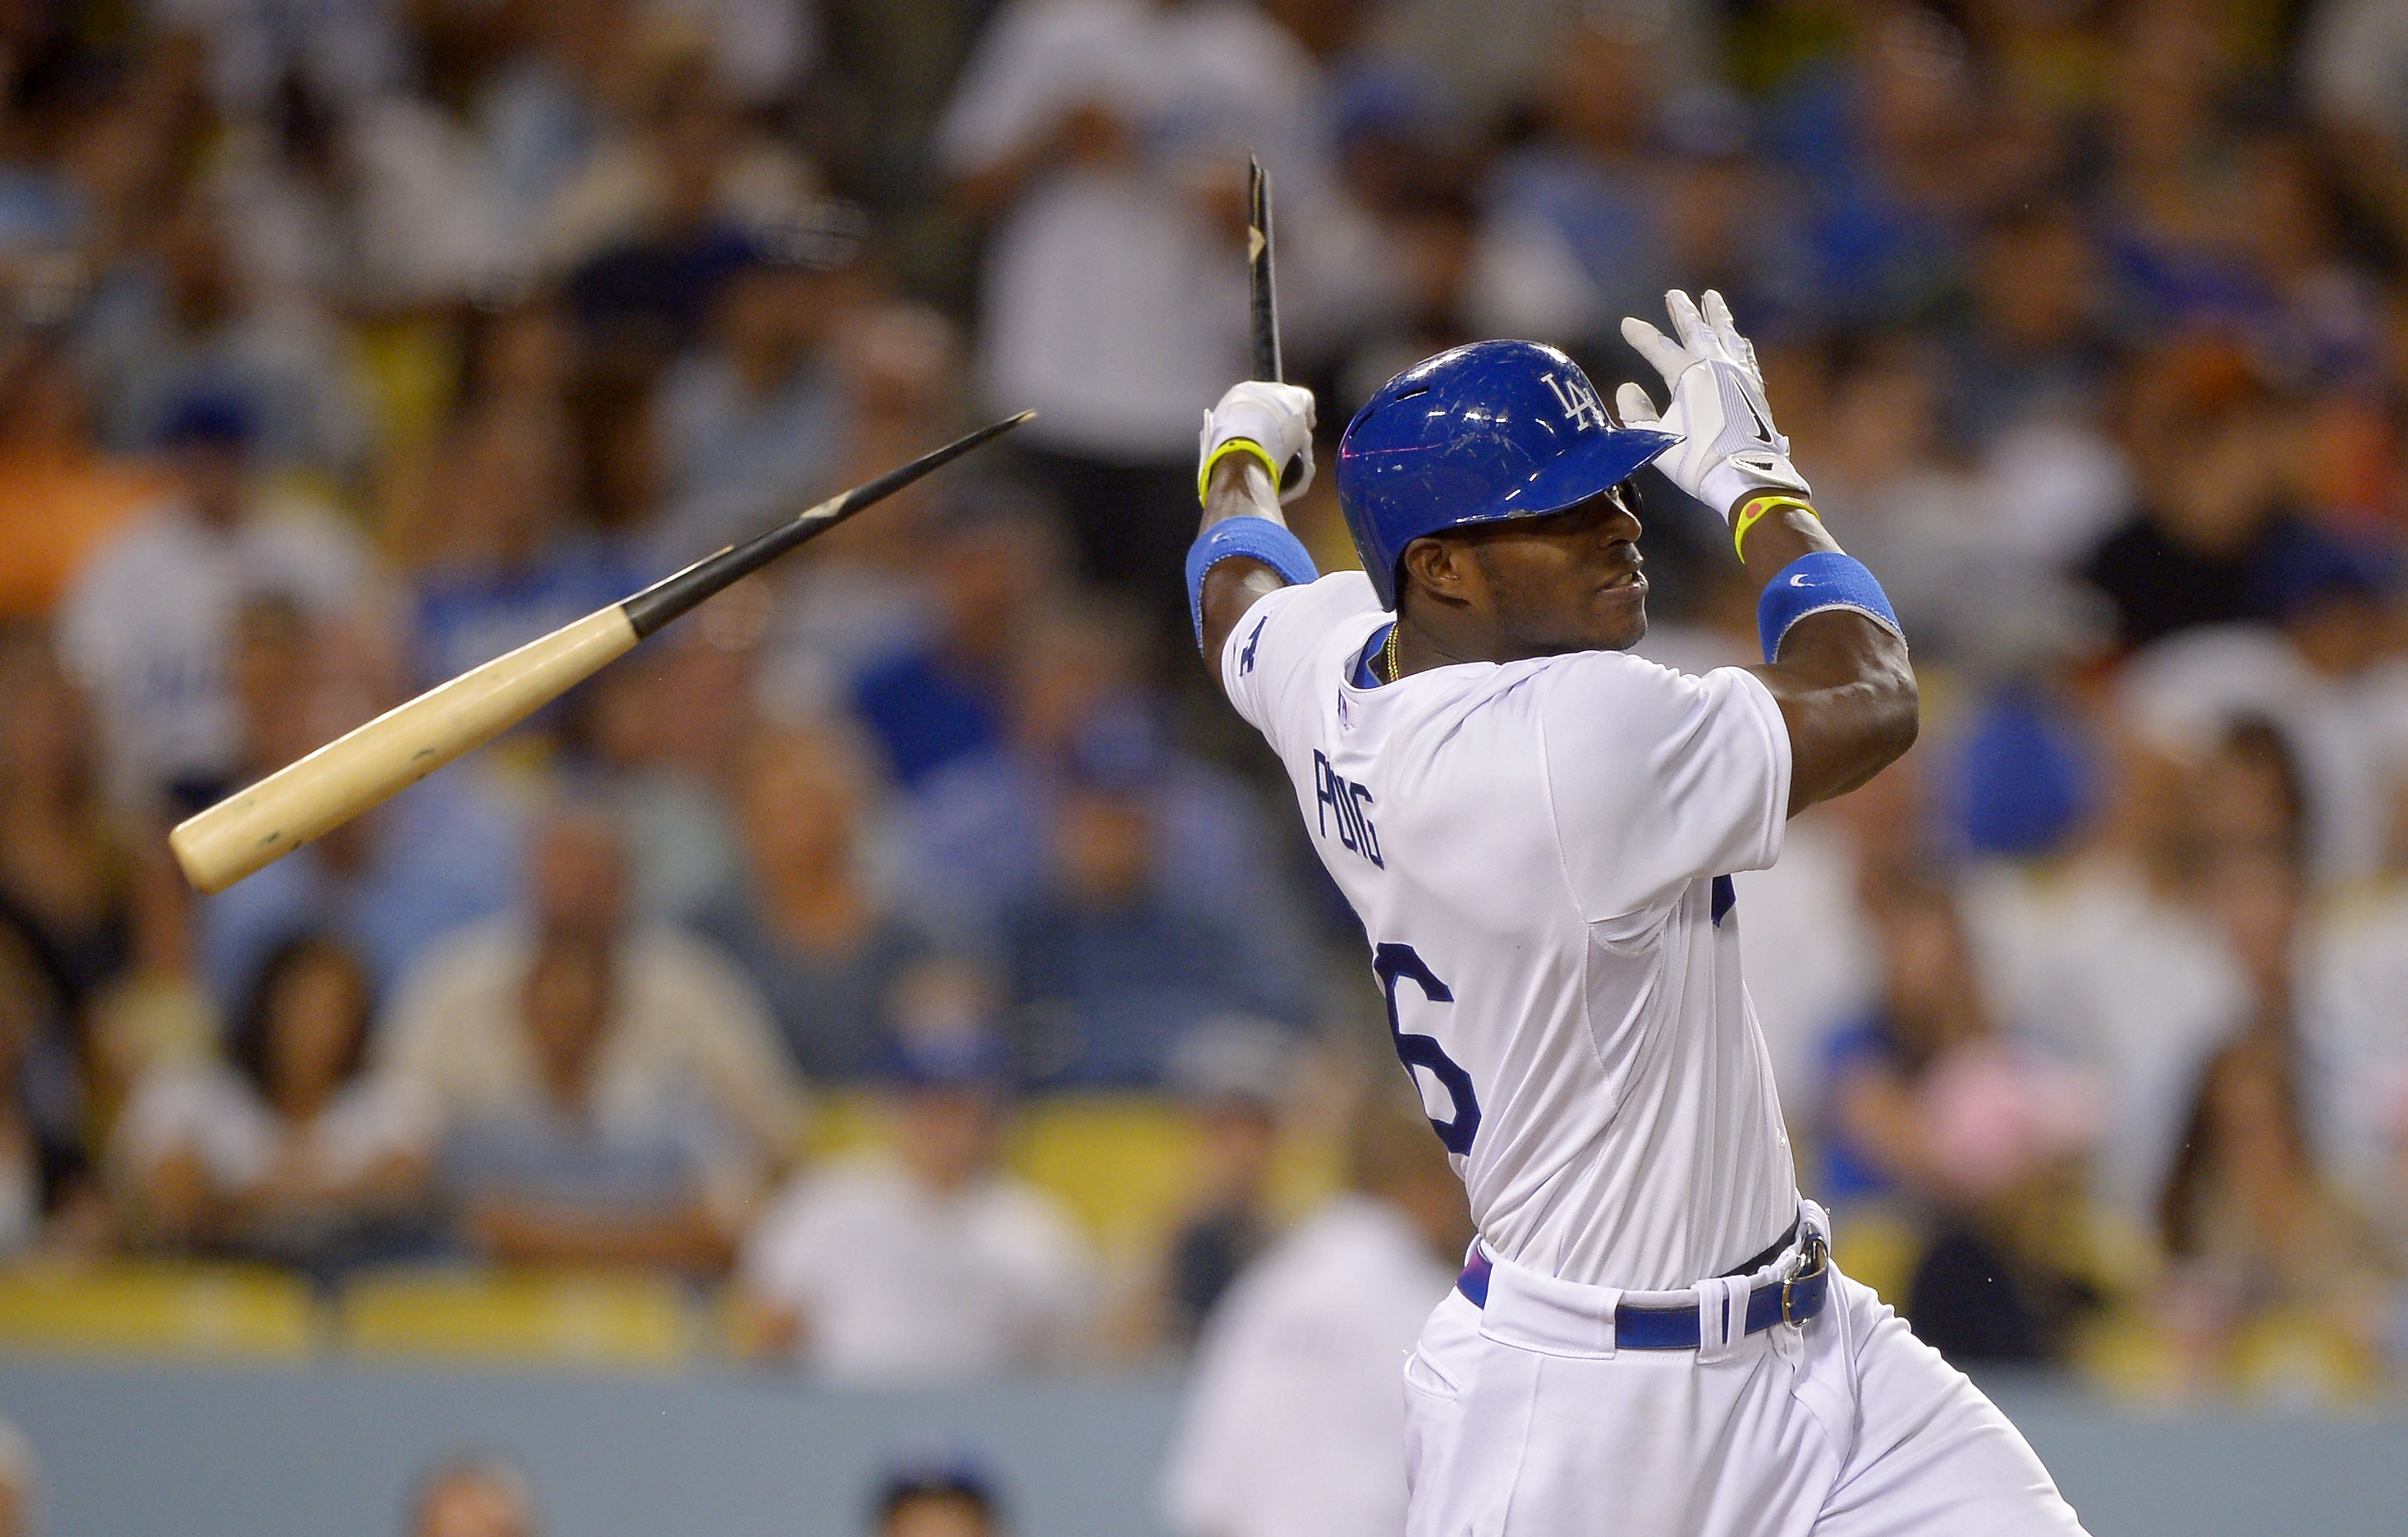 Former Chattanooga Lookout (2013) Yasiel Puig Continues To